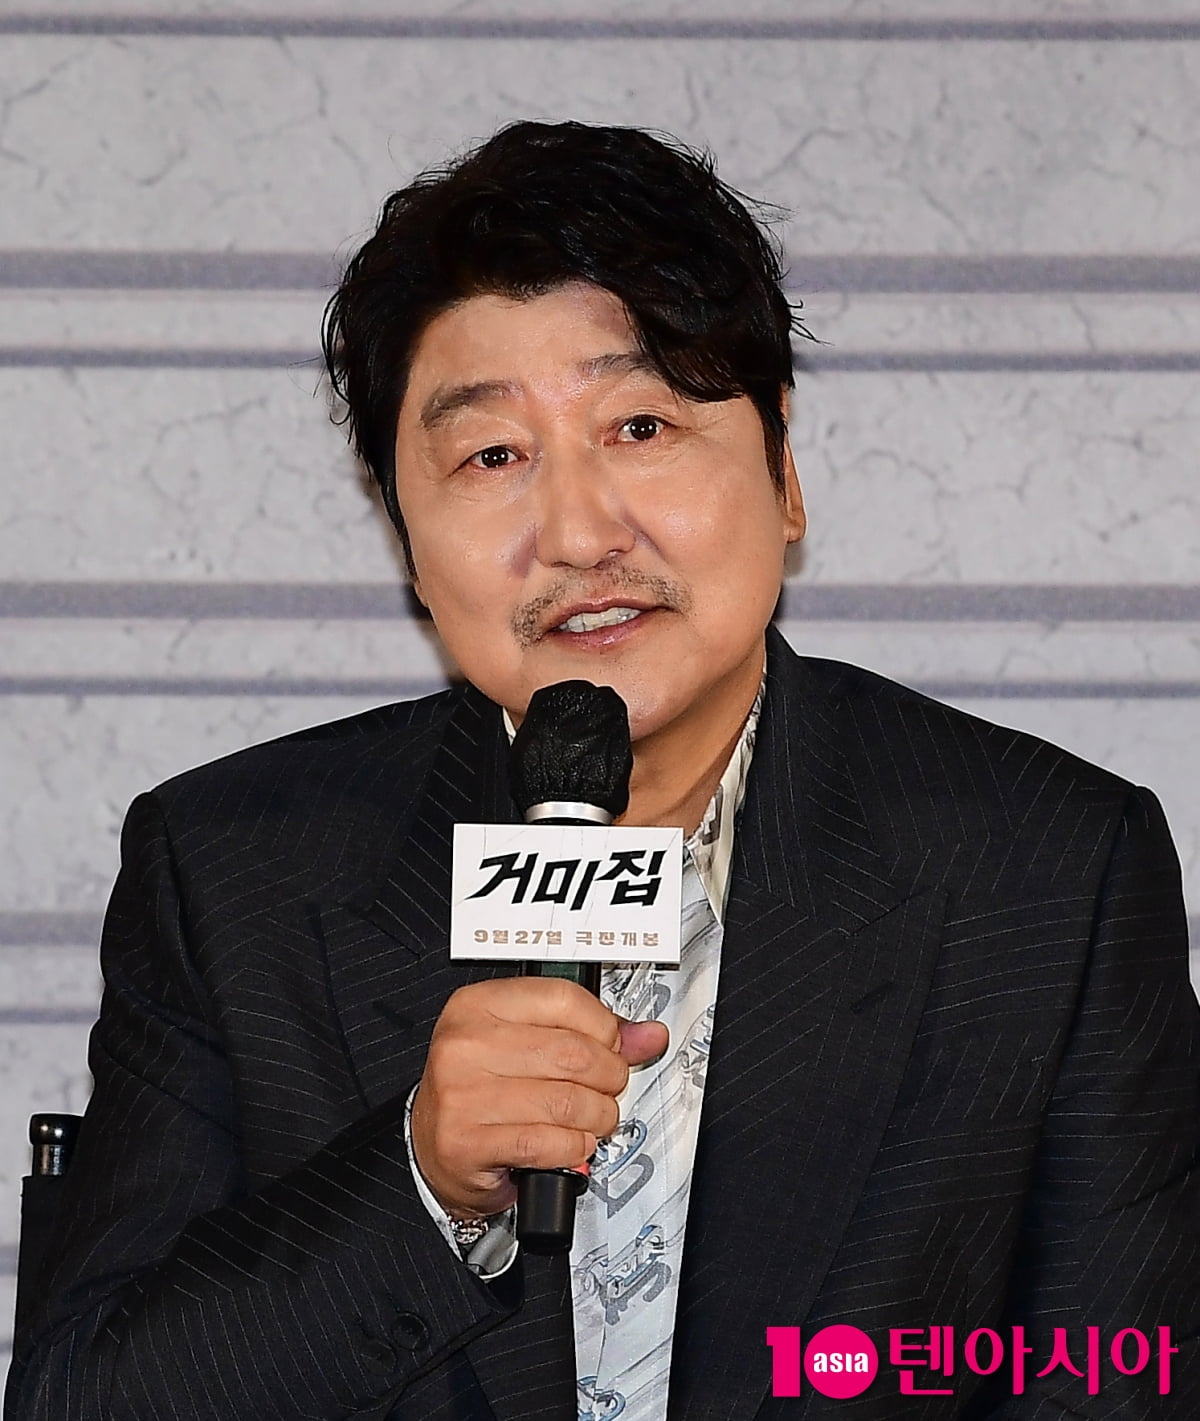 Director Kim Jee-woon "Song Kang-ho, the place he went to most other than his home was the Cannes Film Festival"